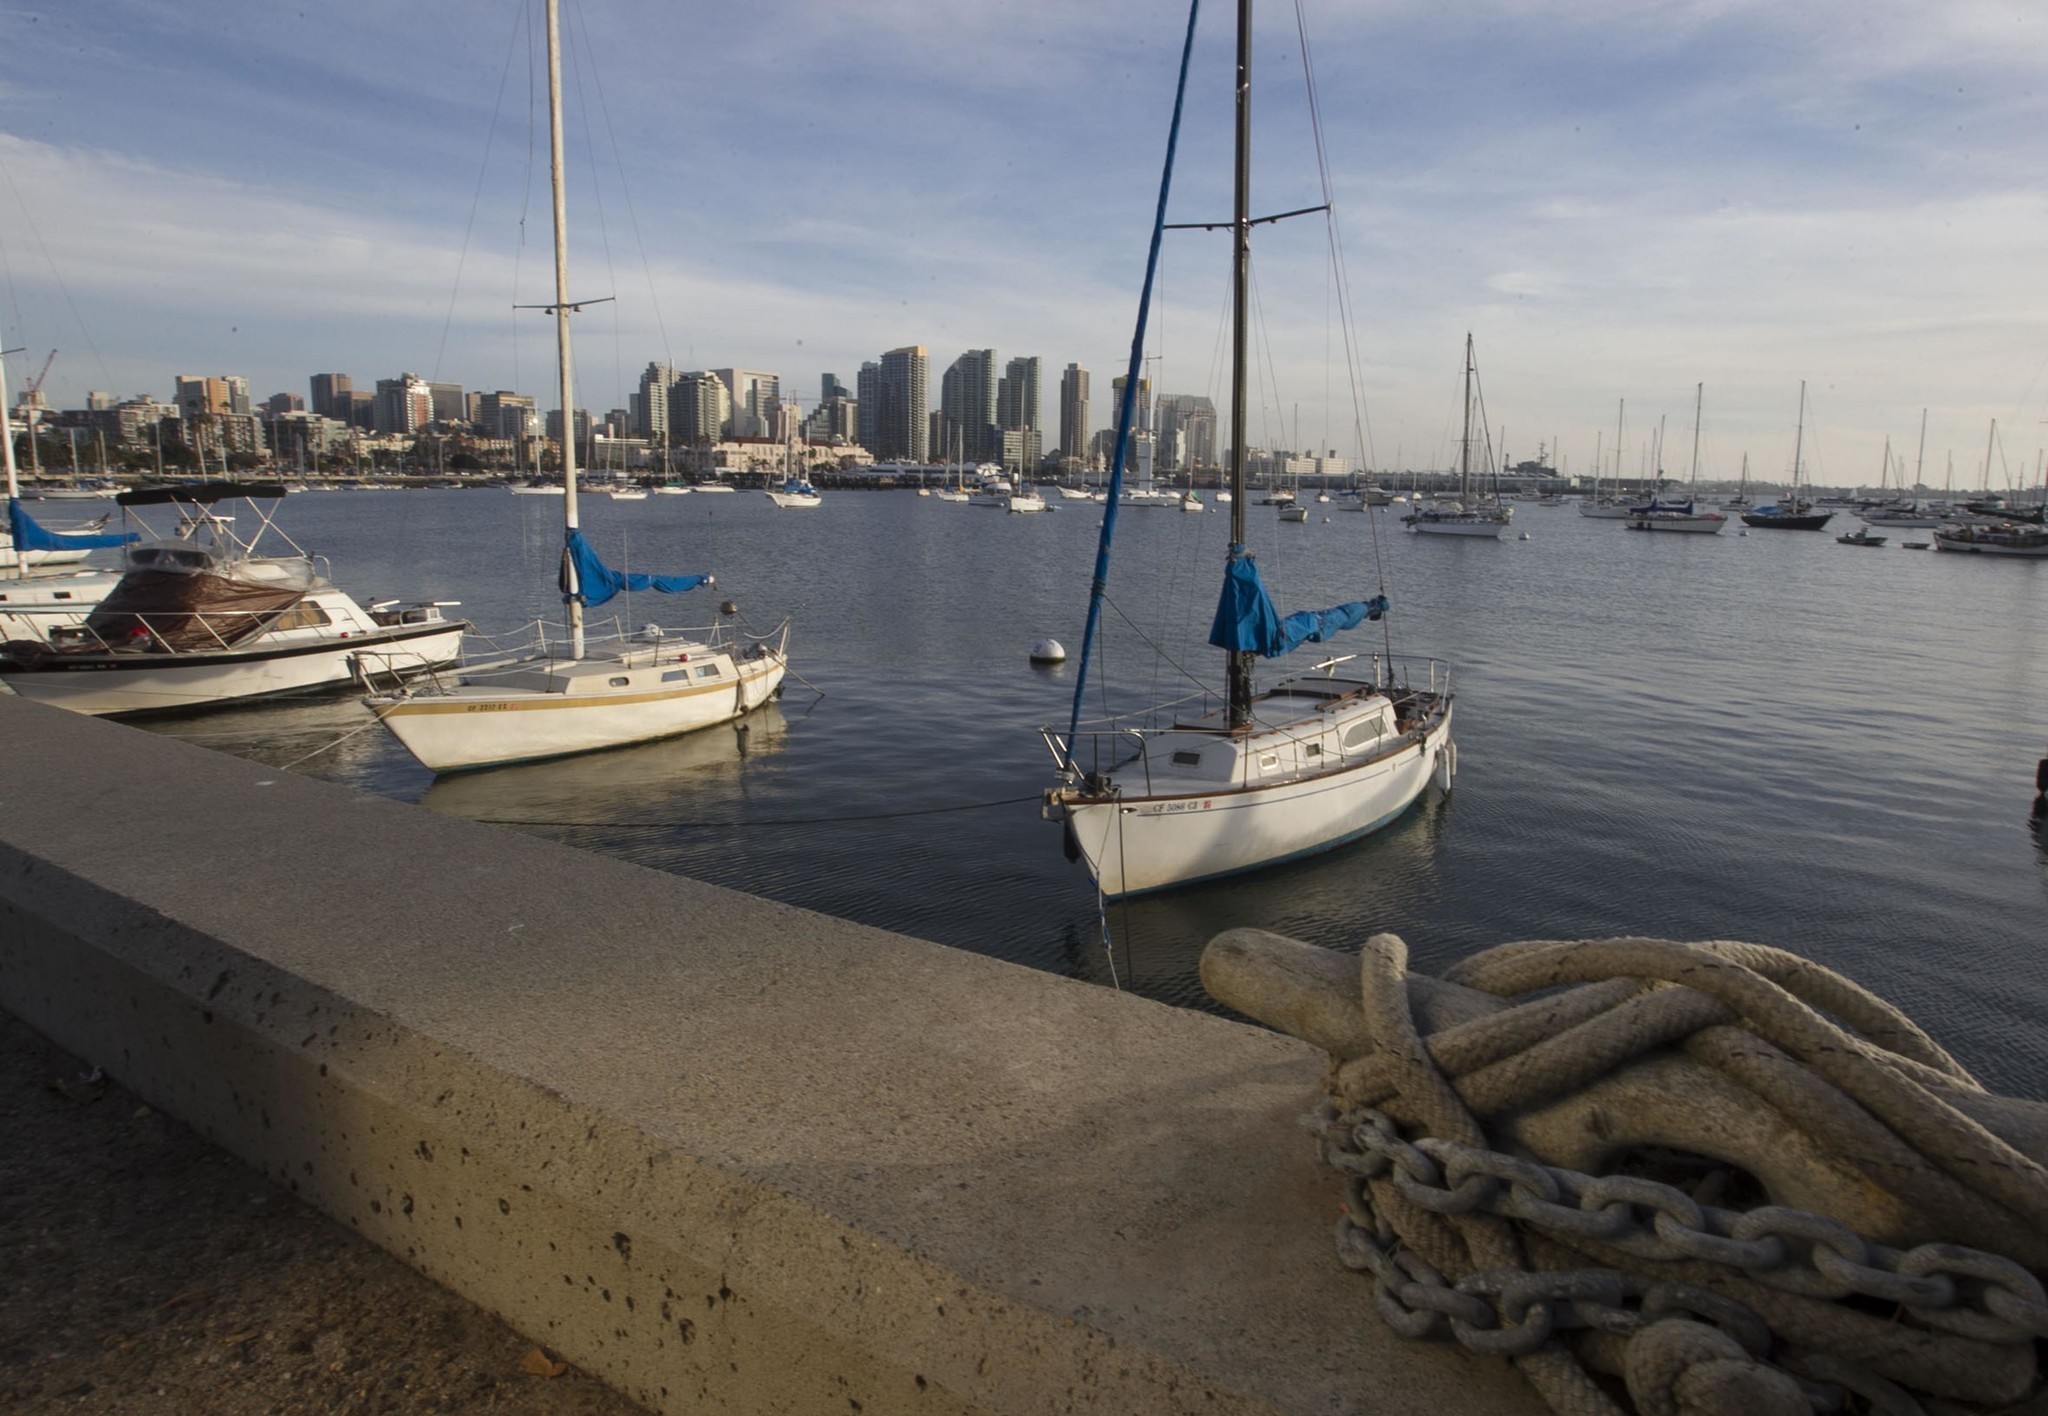 Boat owners frustrated by Port parking changes - The San Diego Union ...